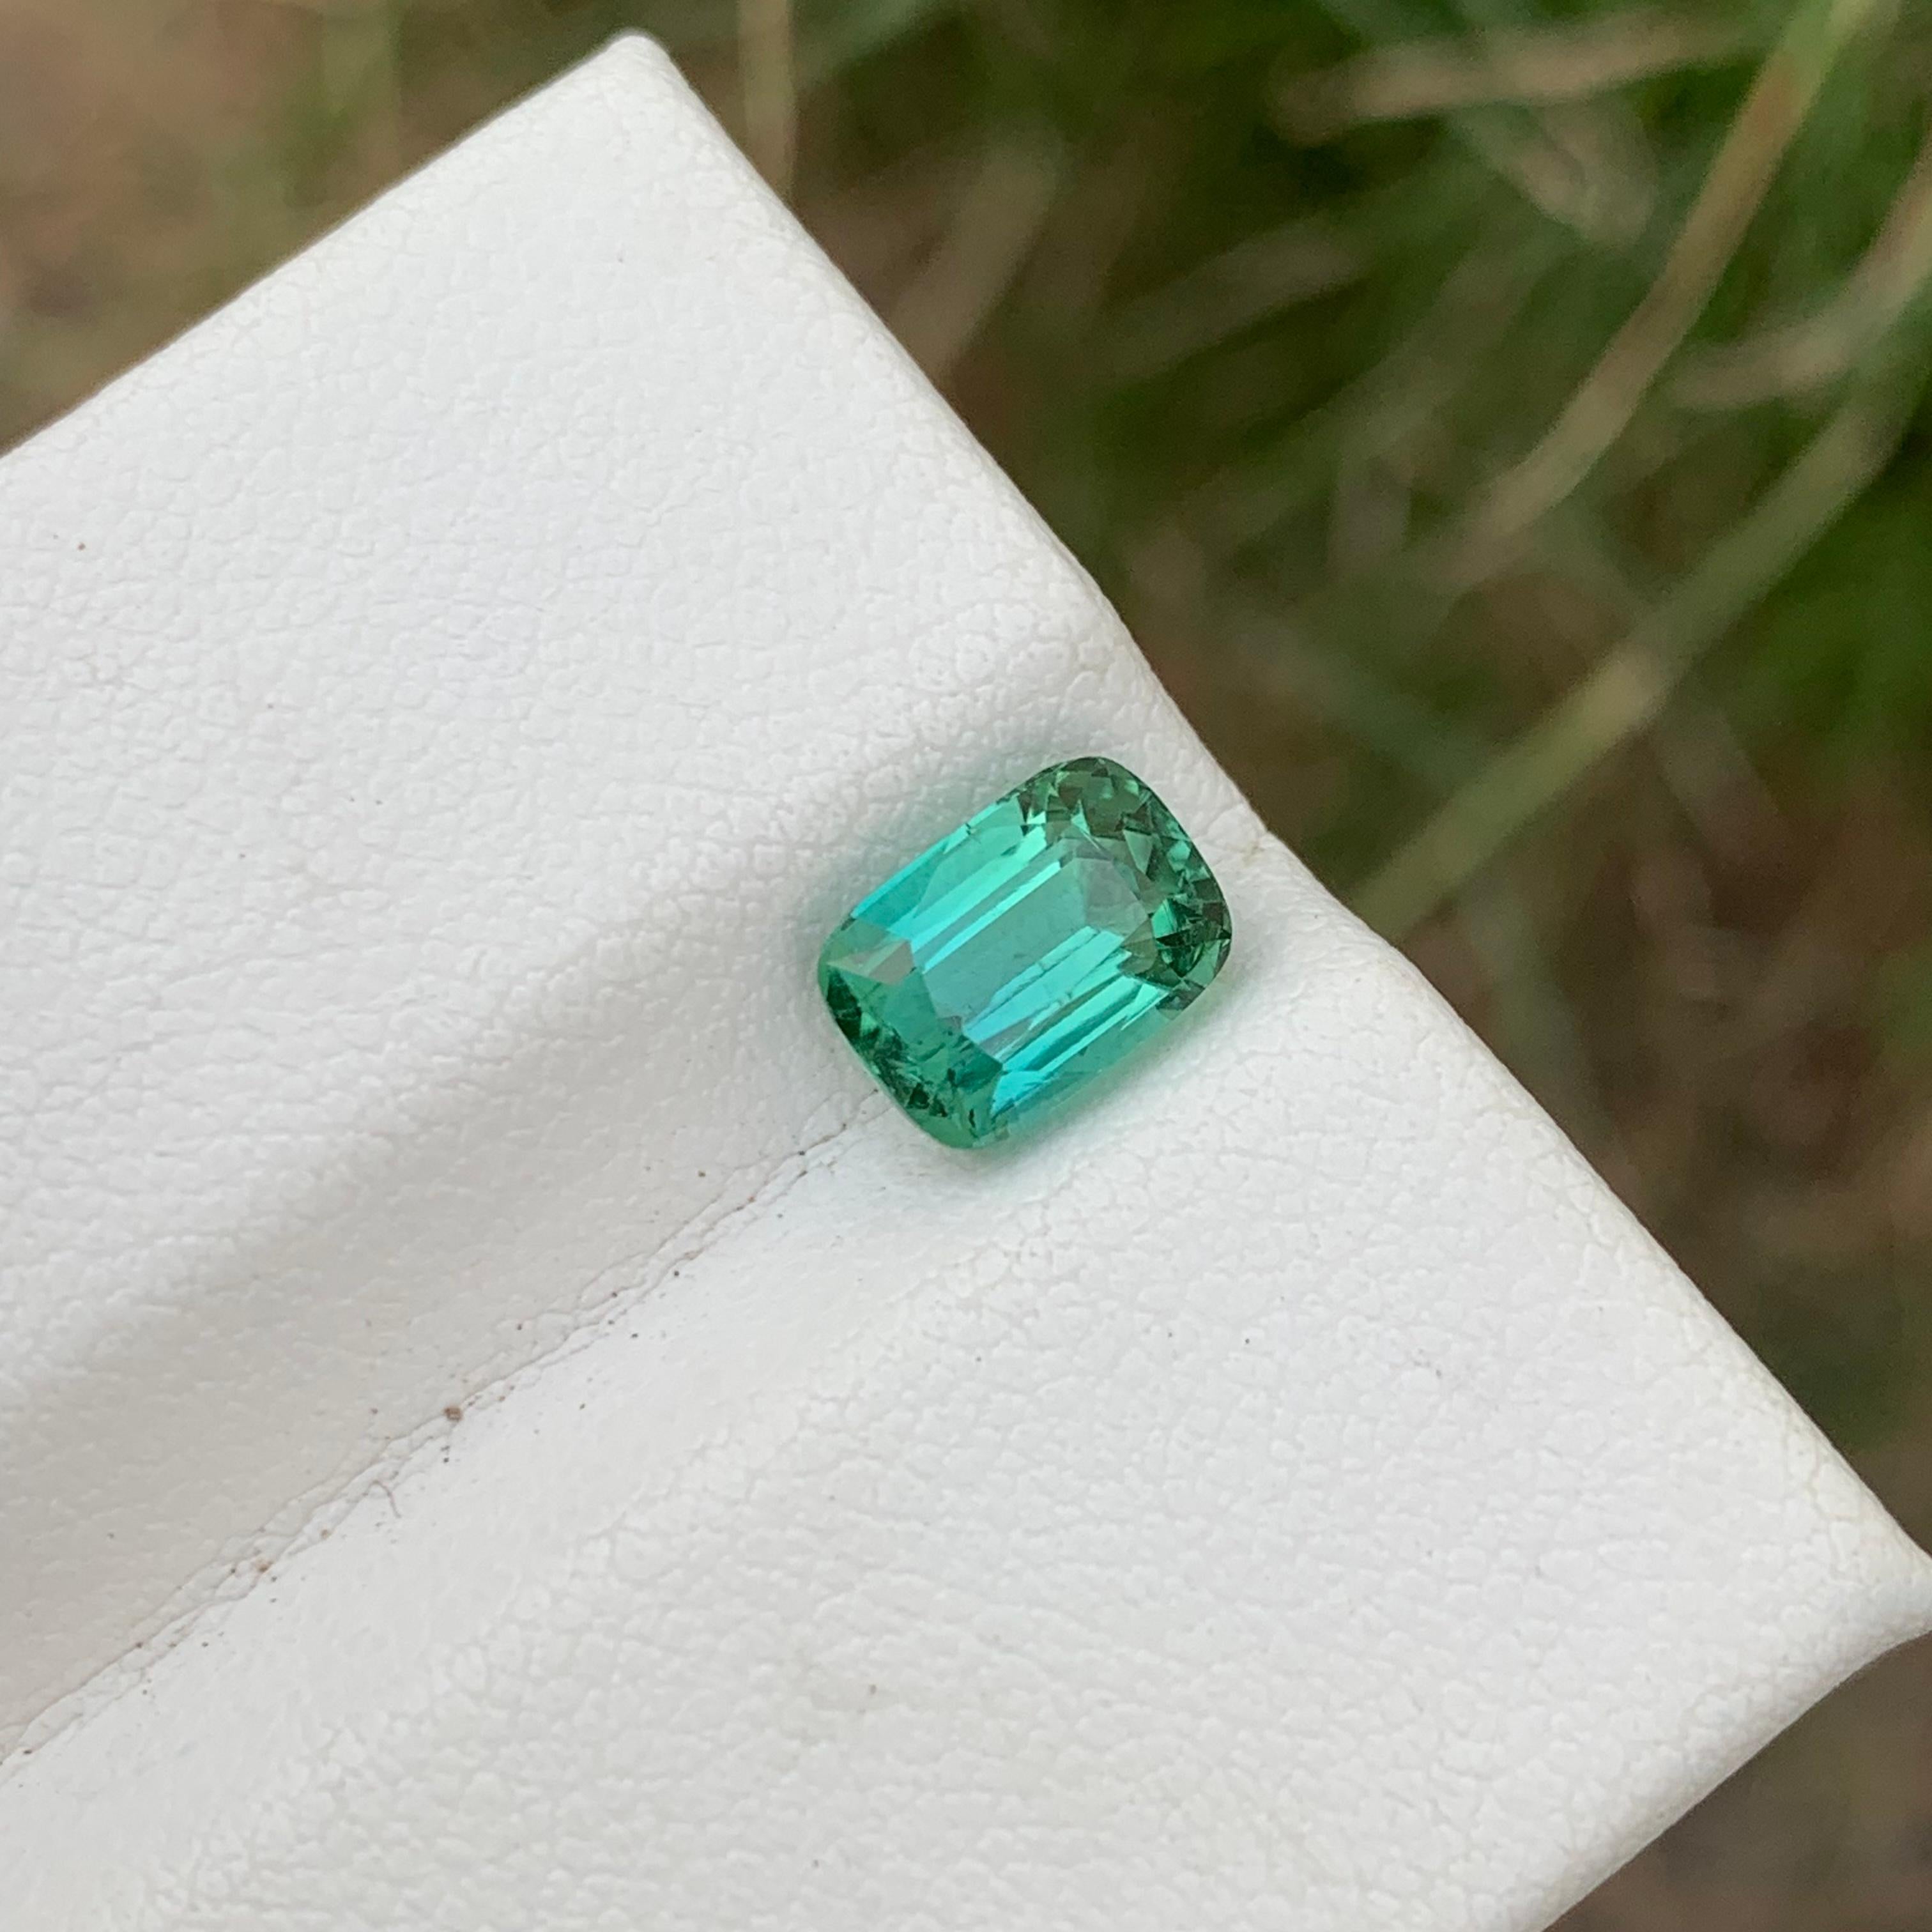 Beauteous 1.90 Cts Blueish Green Loose Tourmaline Ring Gemstone Afghan Mine  For Sale 2